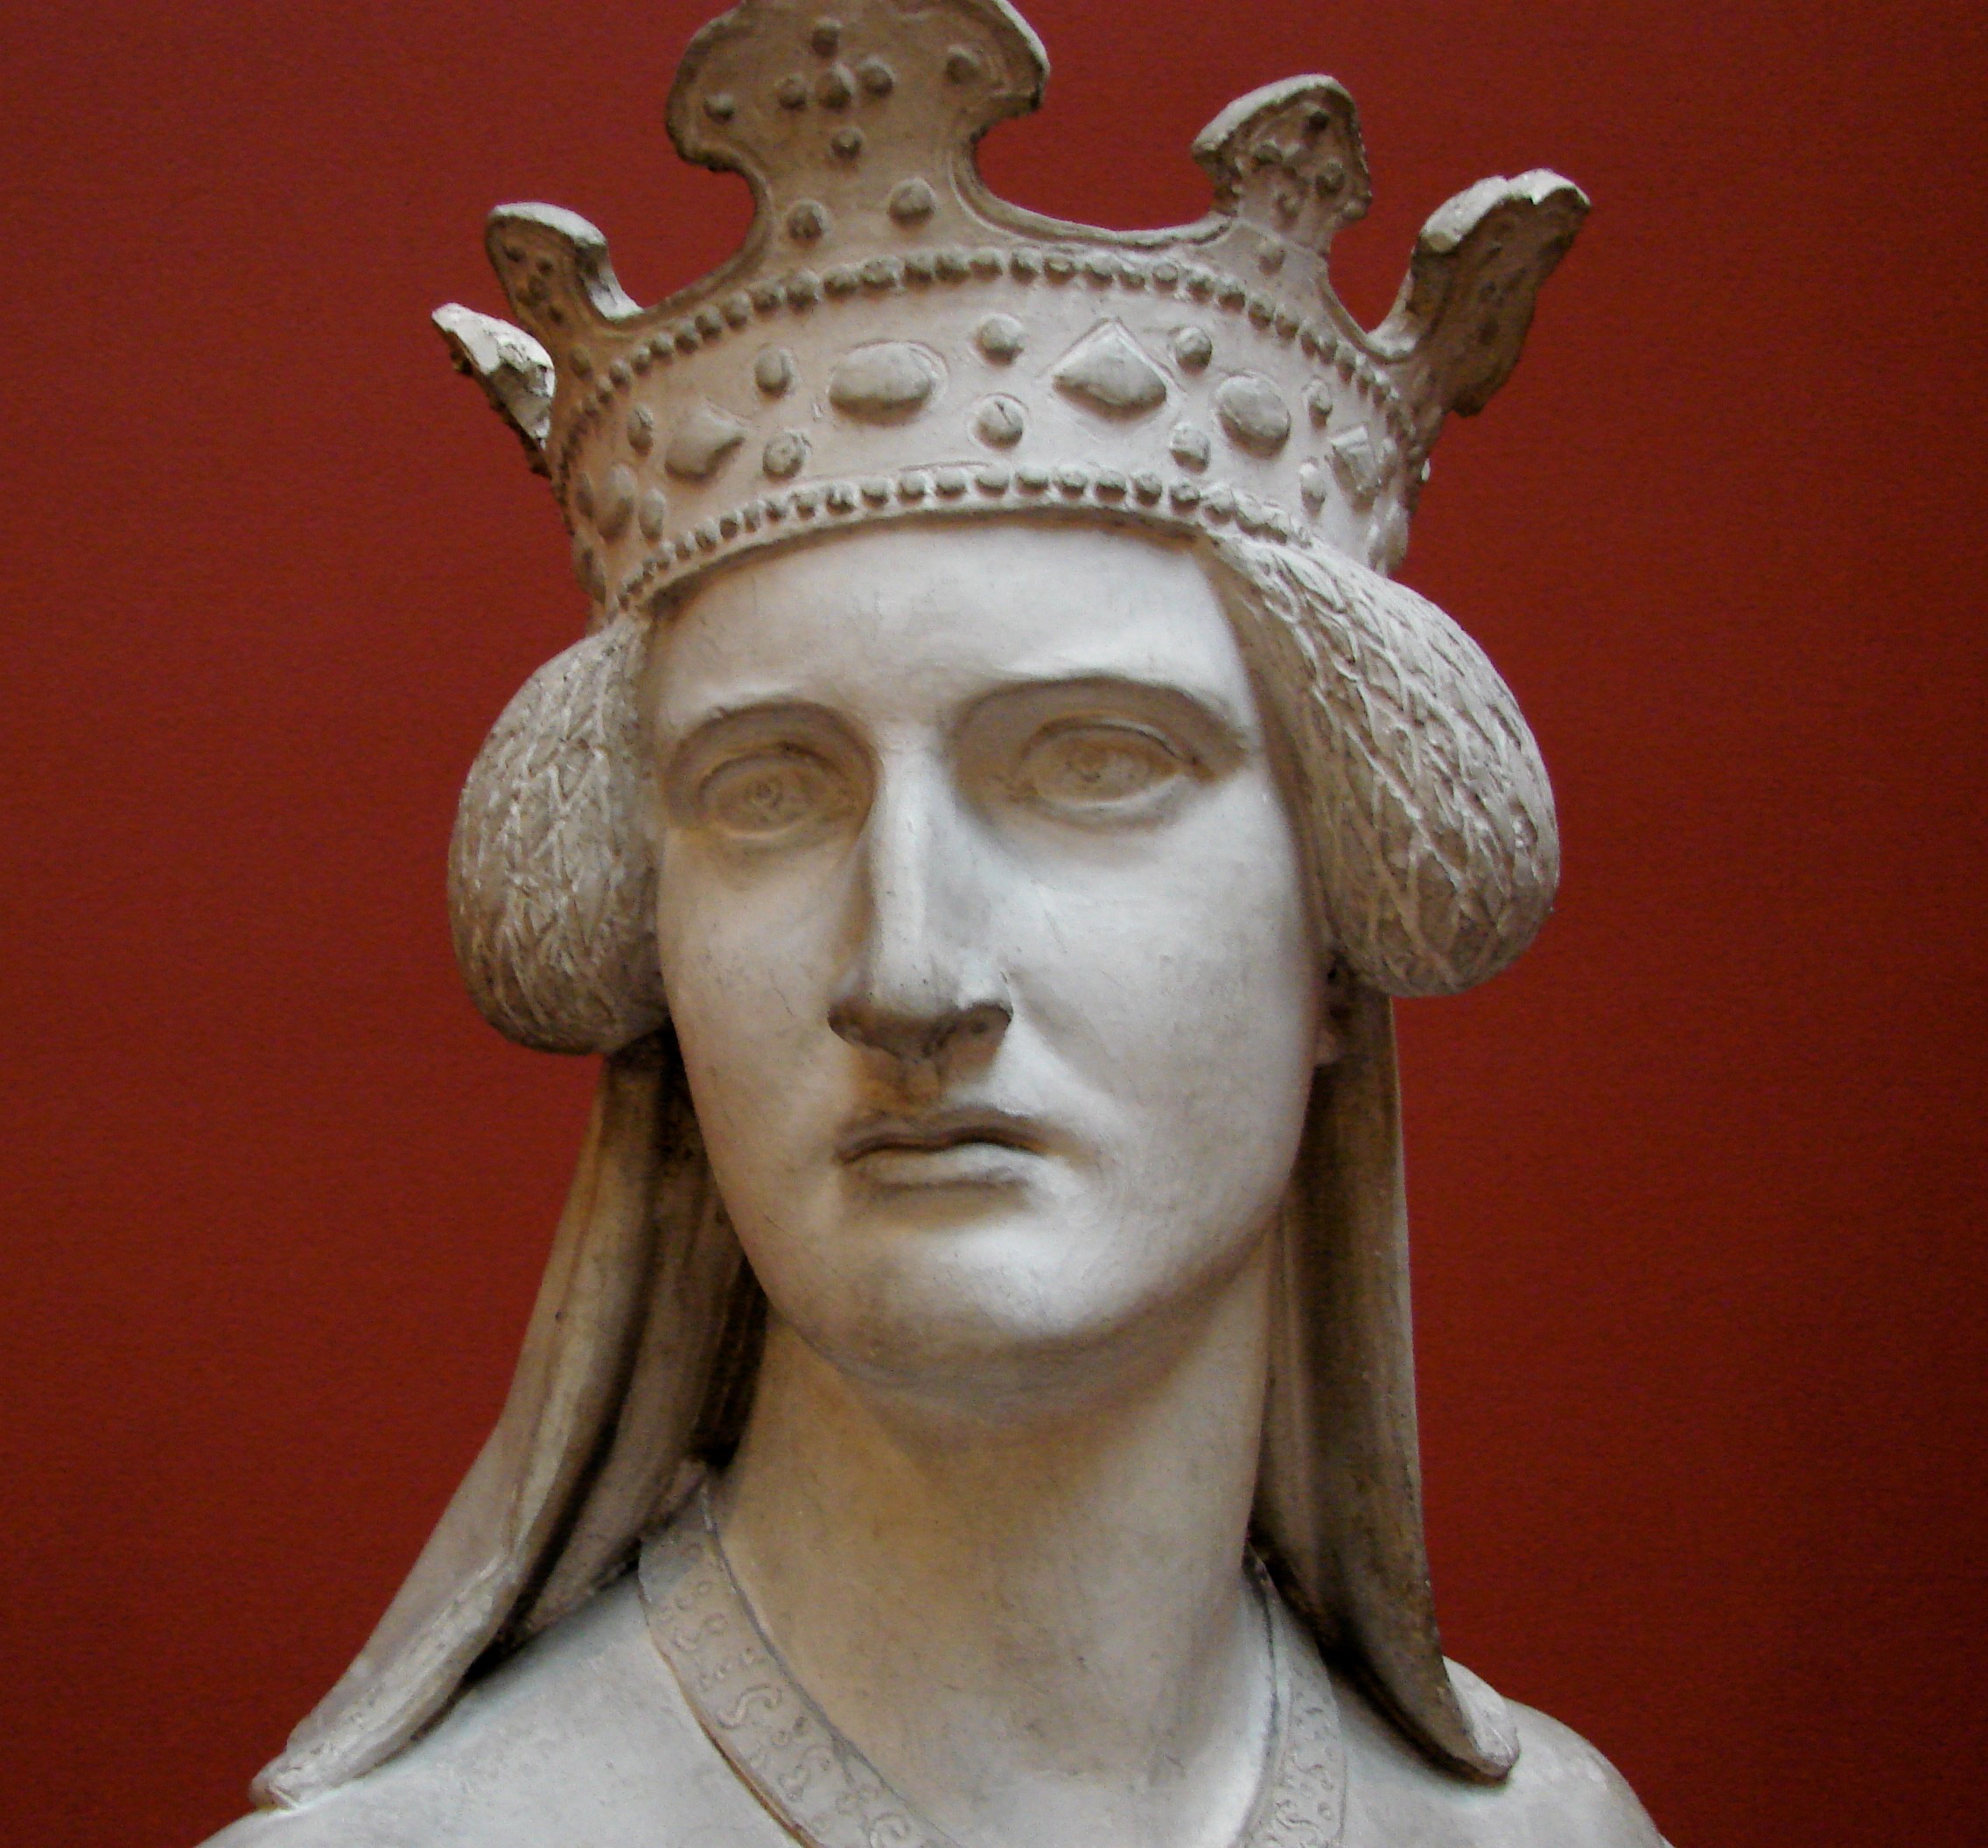 Queen Filippa, detail from sculpture by H W Bissen, Ny Carlsberg Glyptotek, Copenhagen. Photographer: Orf3us, cropped, CCBY-SA 3.0